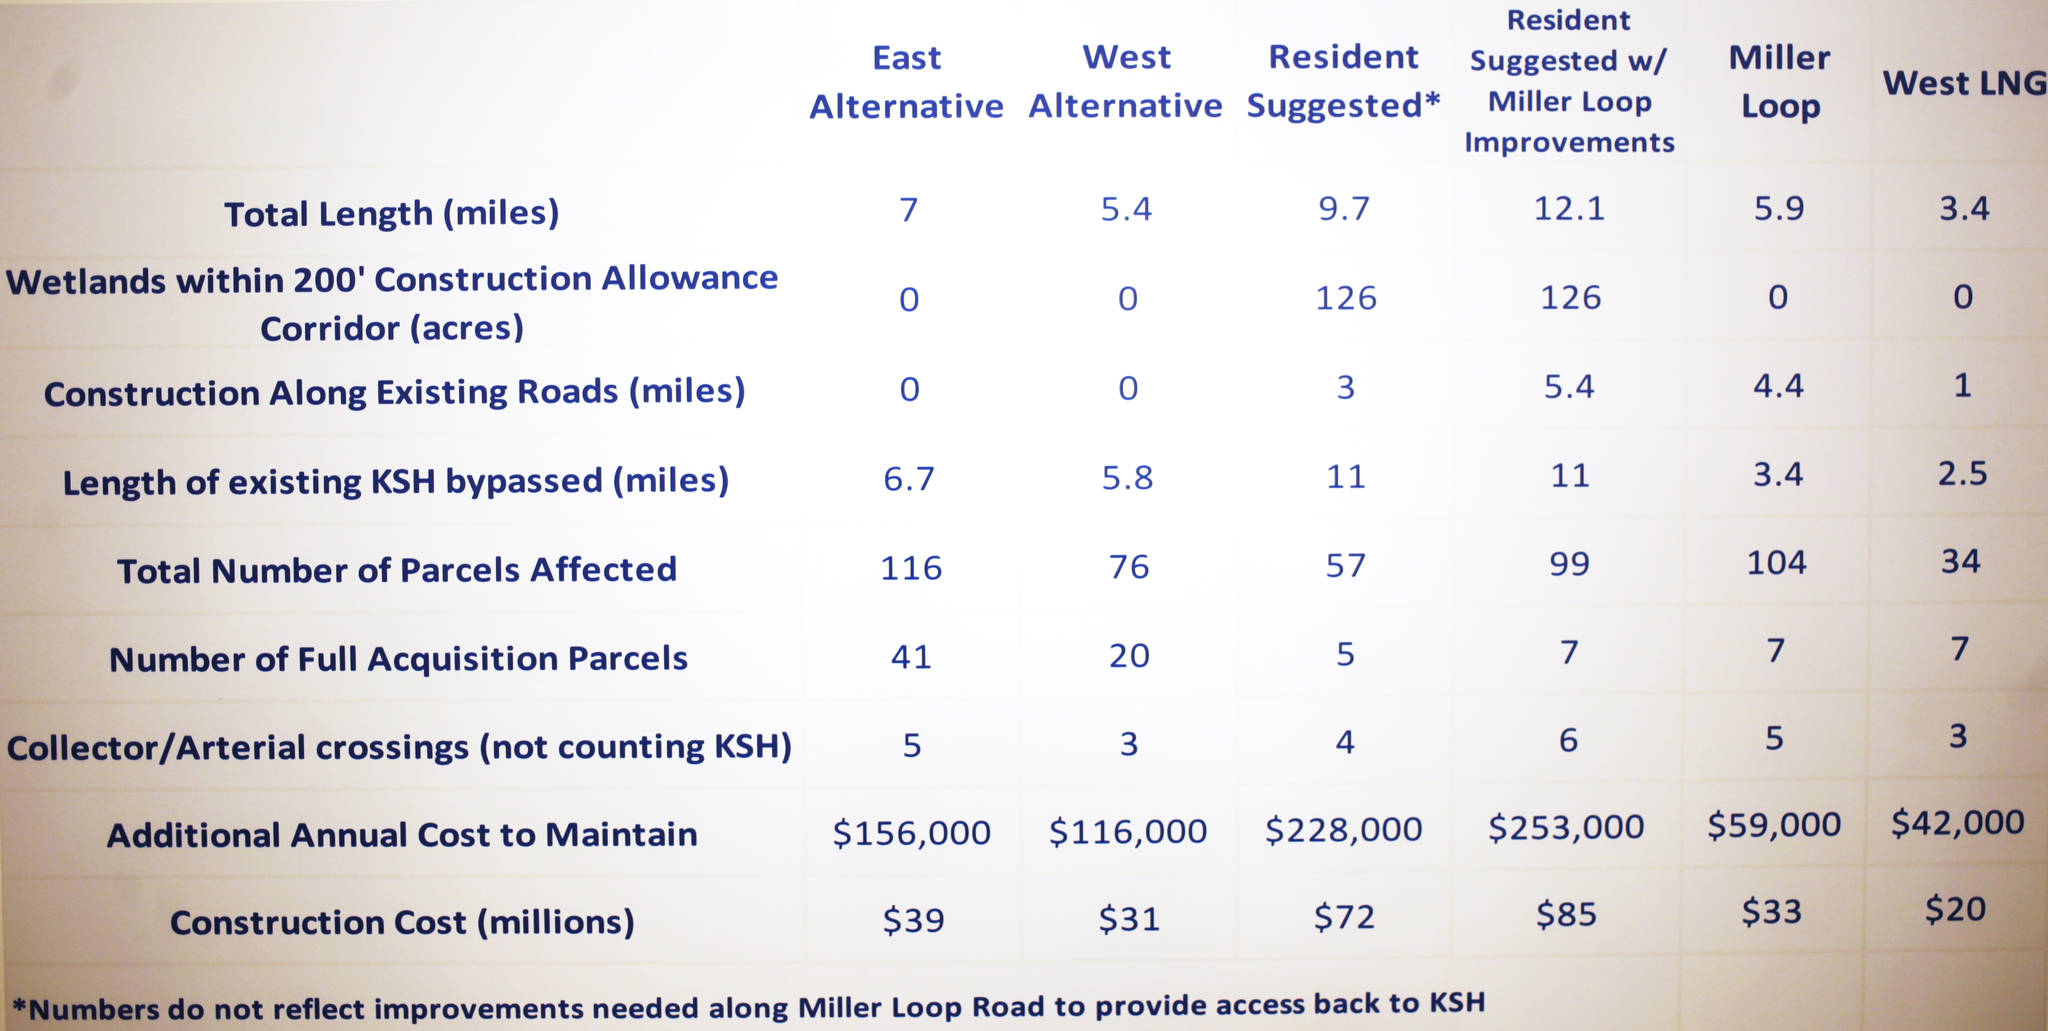 At a Wednesday public meeting in Nikiski, the Alaska Gasline Development Corporation displayed this comparison of five possible routes for moving the Kenai Spur Highway around the 900 acre footprint of its planned natural gas liquifaction facility and export terminal in Nikiski. The choice AGDC announced Wednesday is labeled “West LNG,” the farthest right column. (Ben Boettger/Peninsula Clarion)